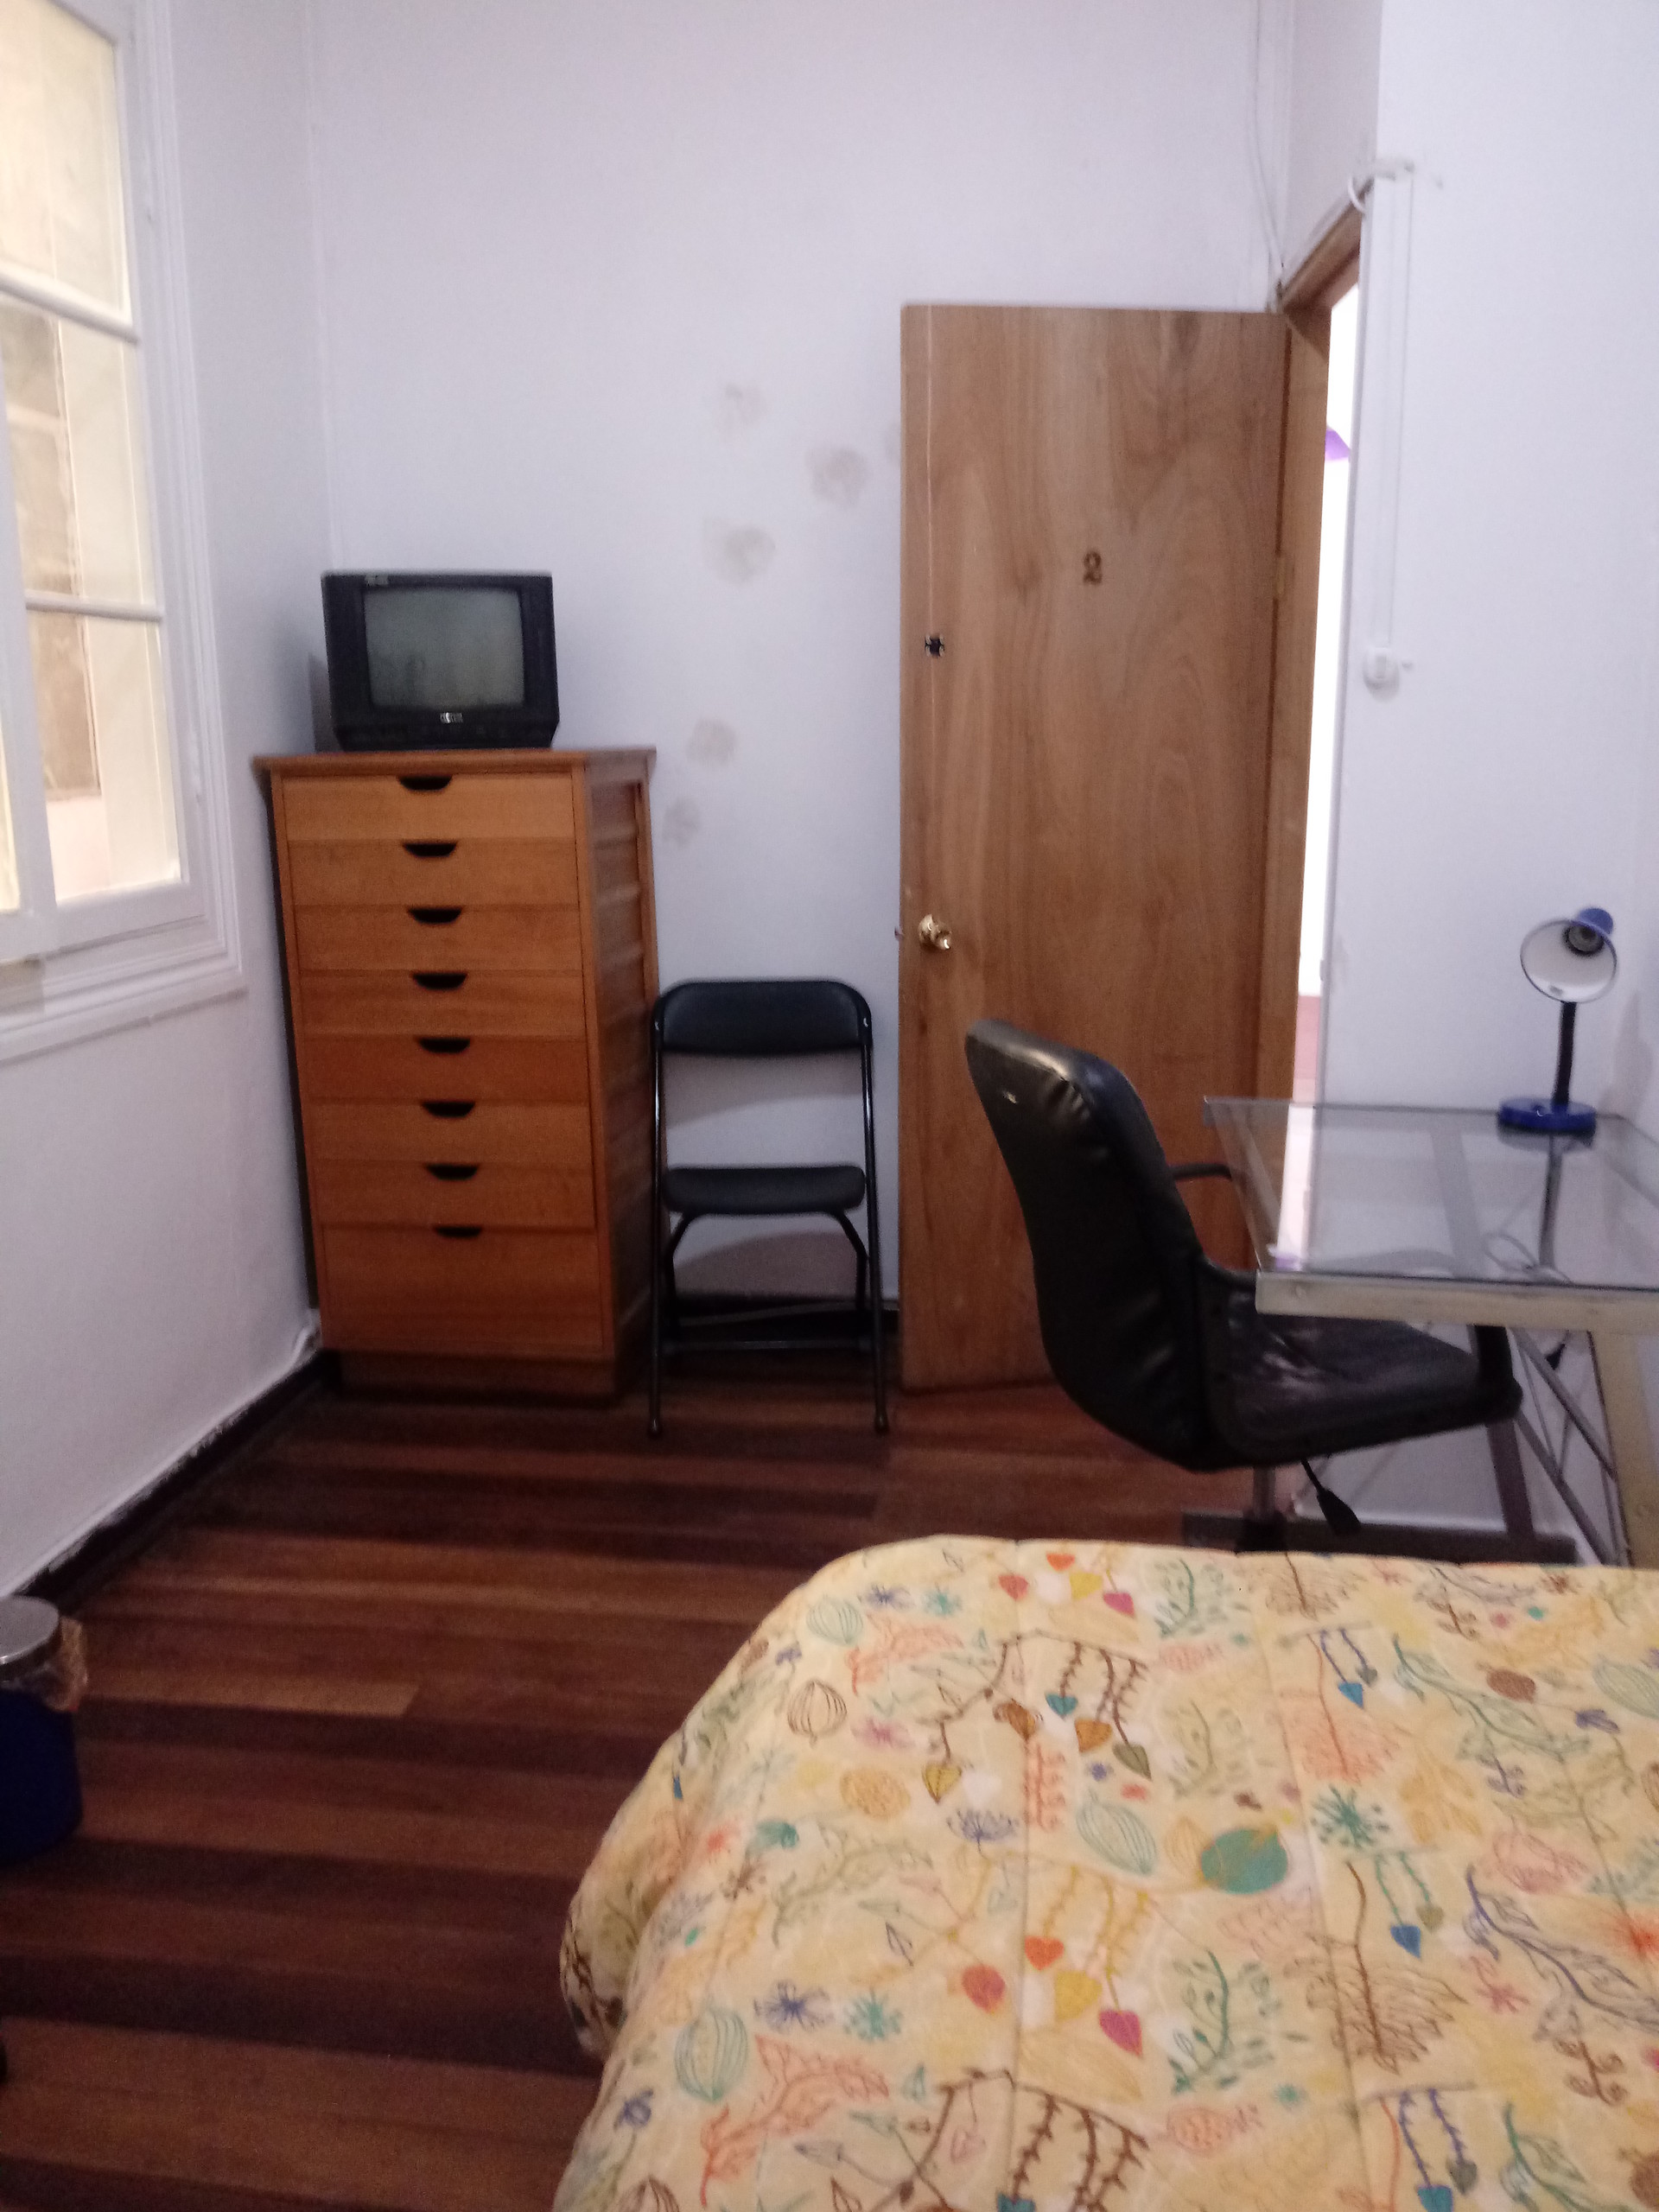 Room For Rent In 14 Bedroom Apartment In Valparaiso